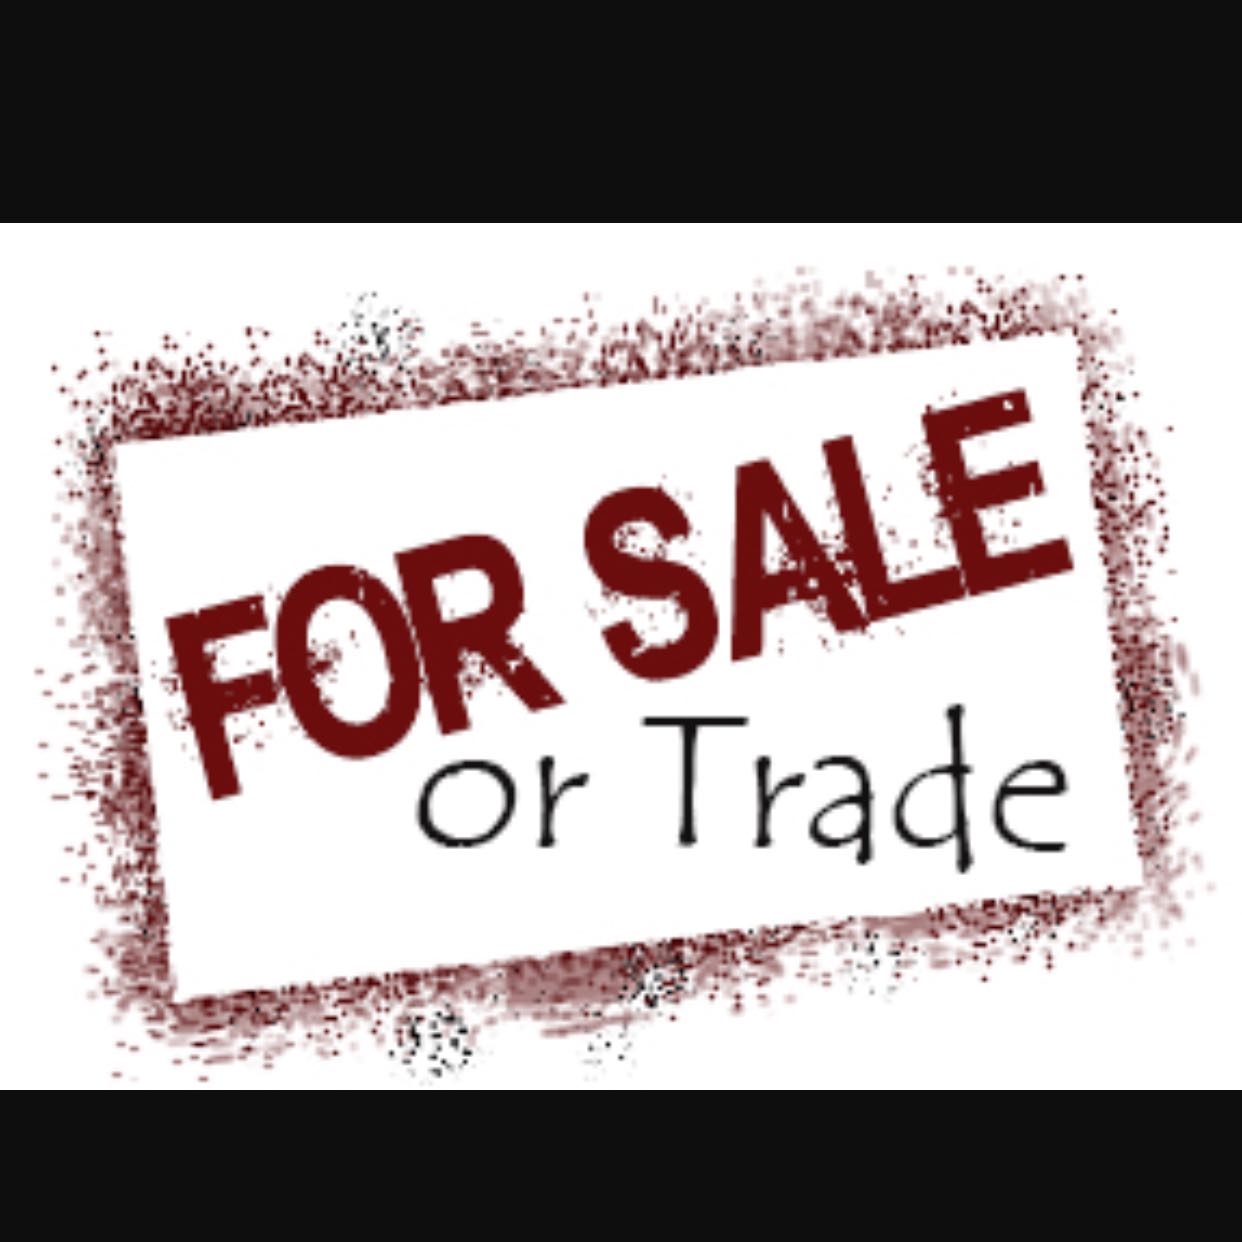 Trade sale. Page for sale. Ru sales group